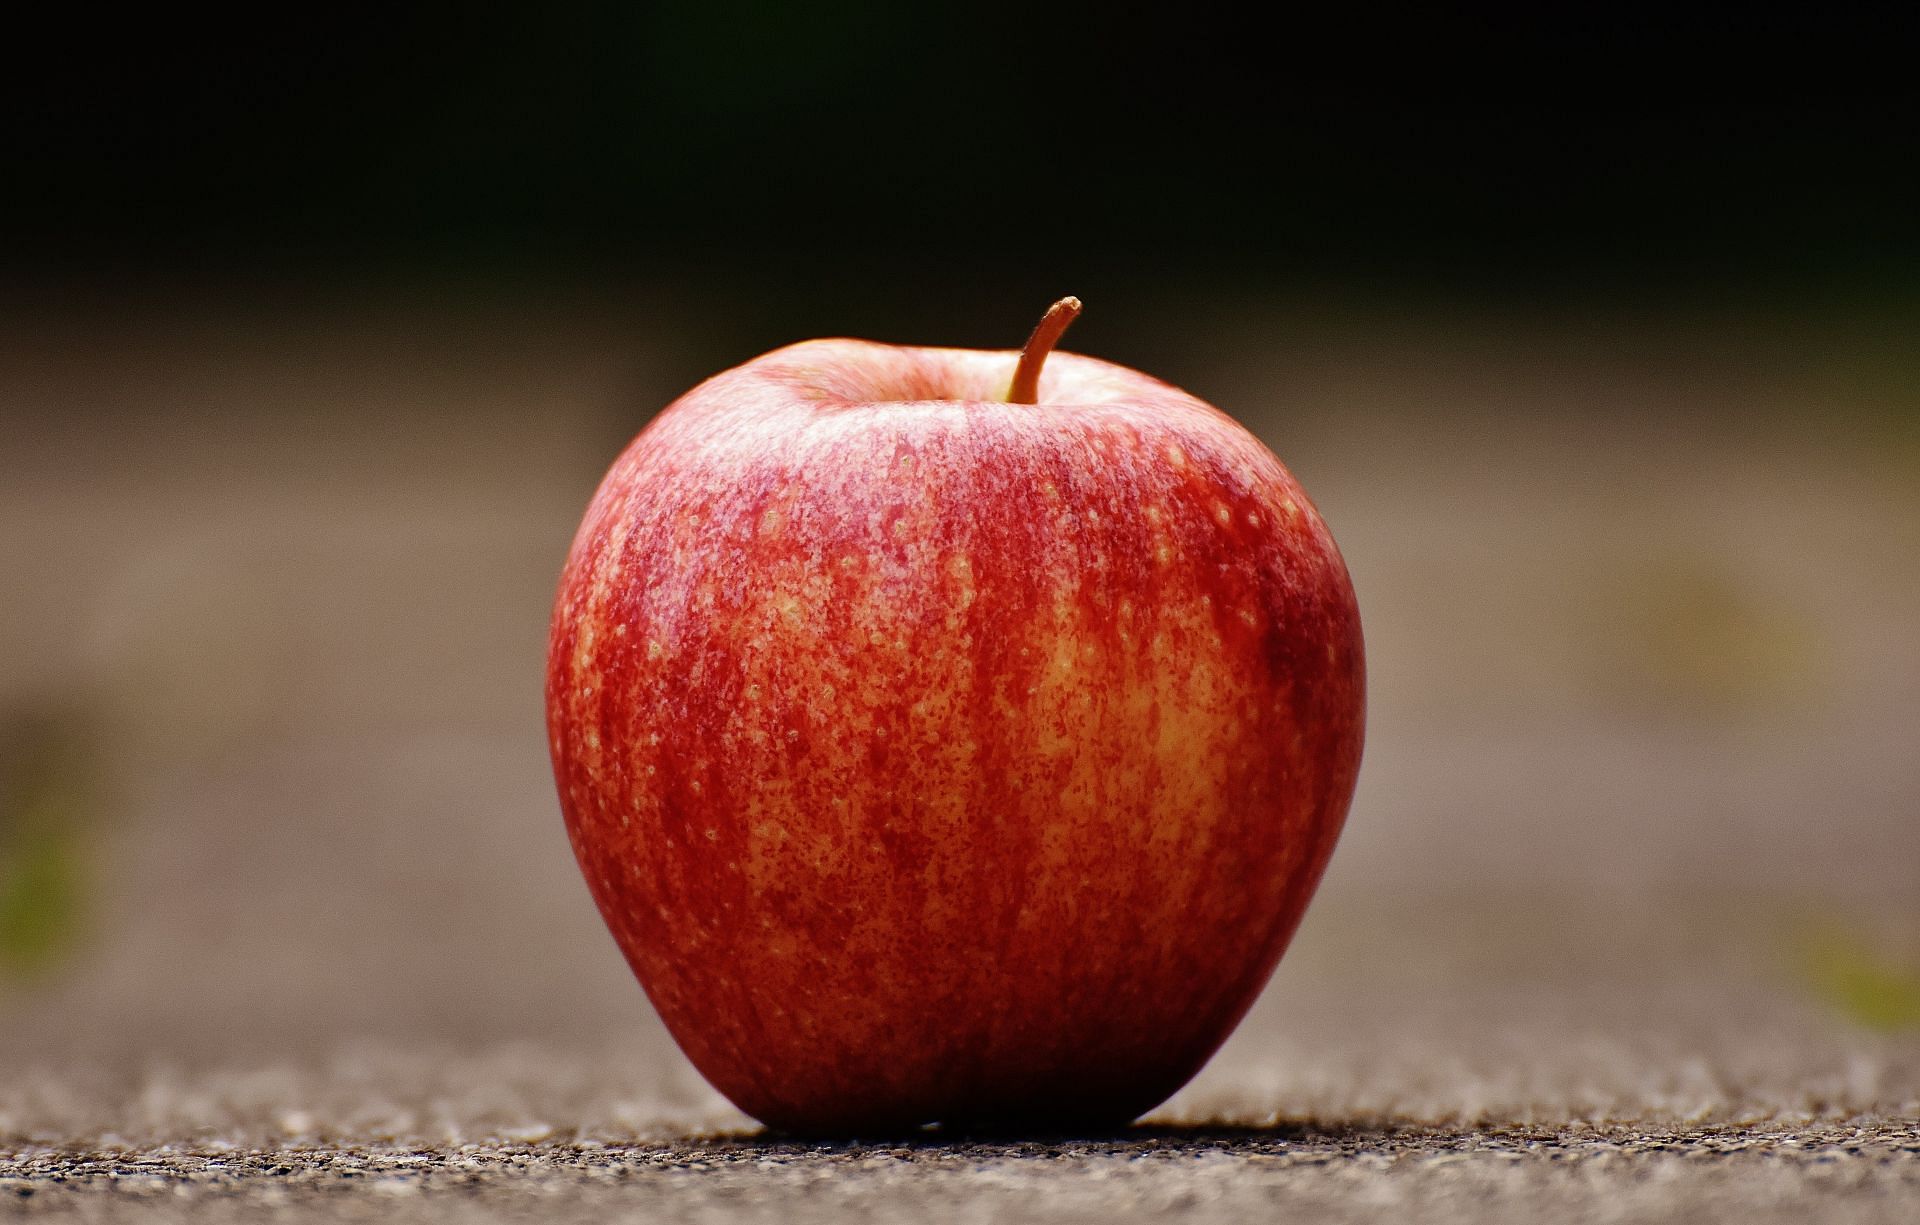 Importance of apples for weight loss with PCOS (image sourced via Pexels / Photo by Pixabay)